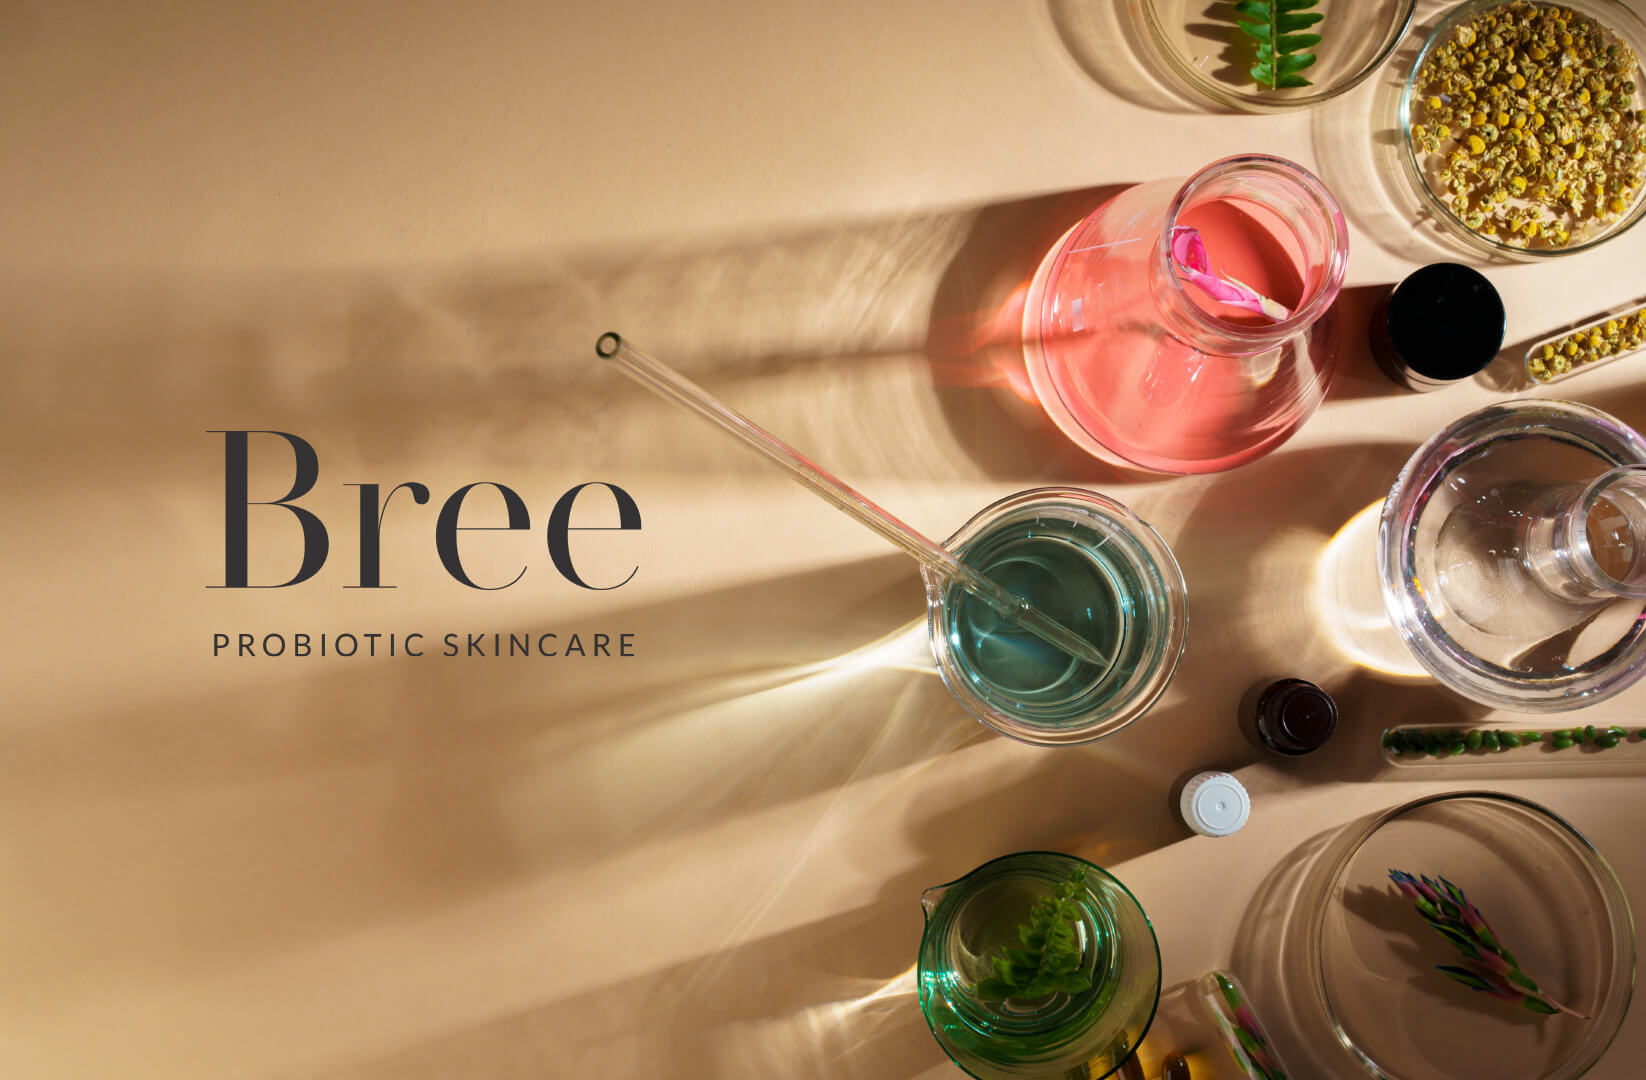 Featured image for “Bree Skincare”